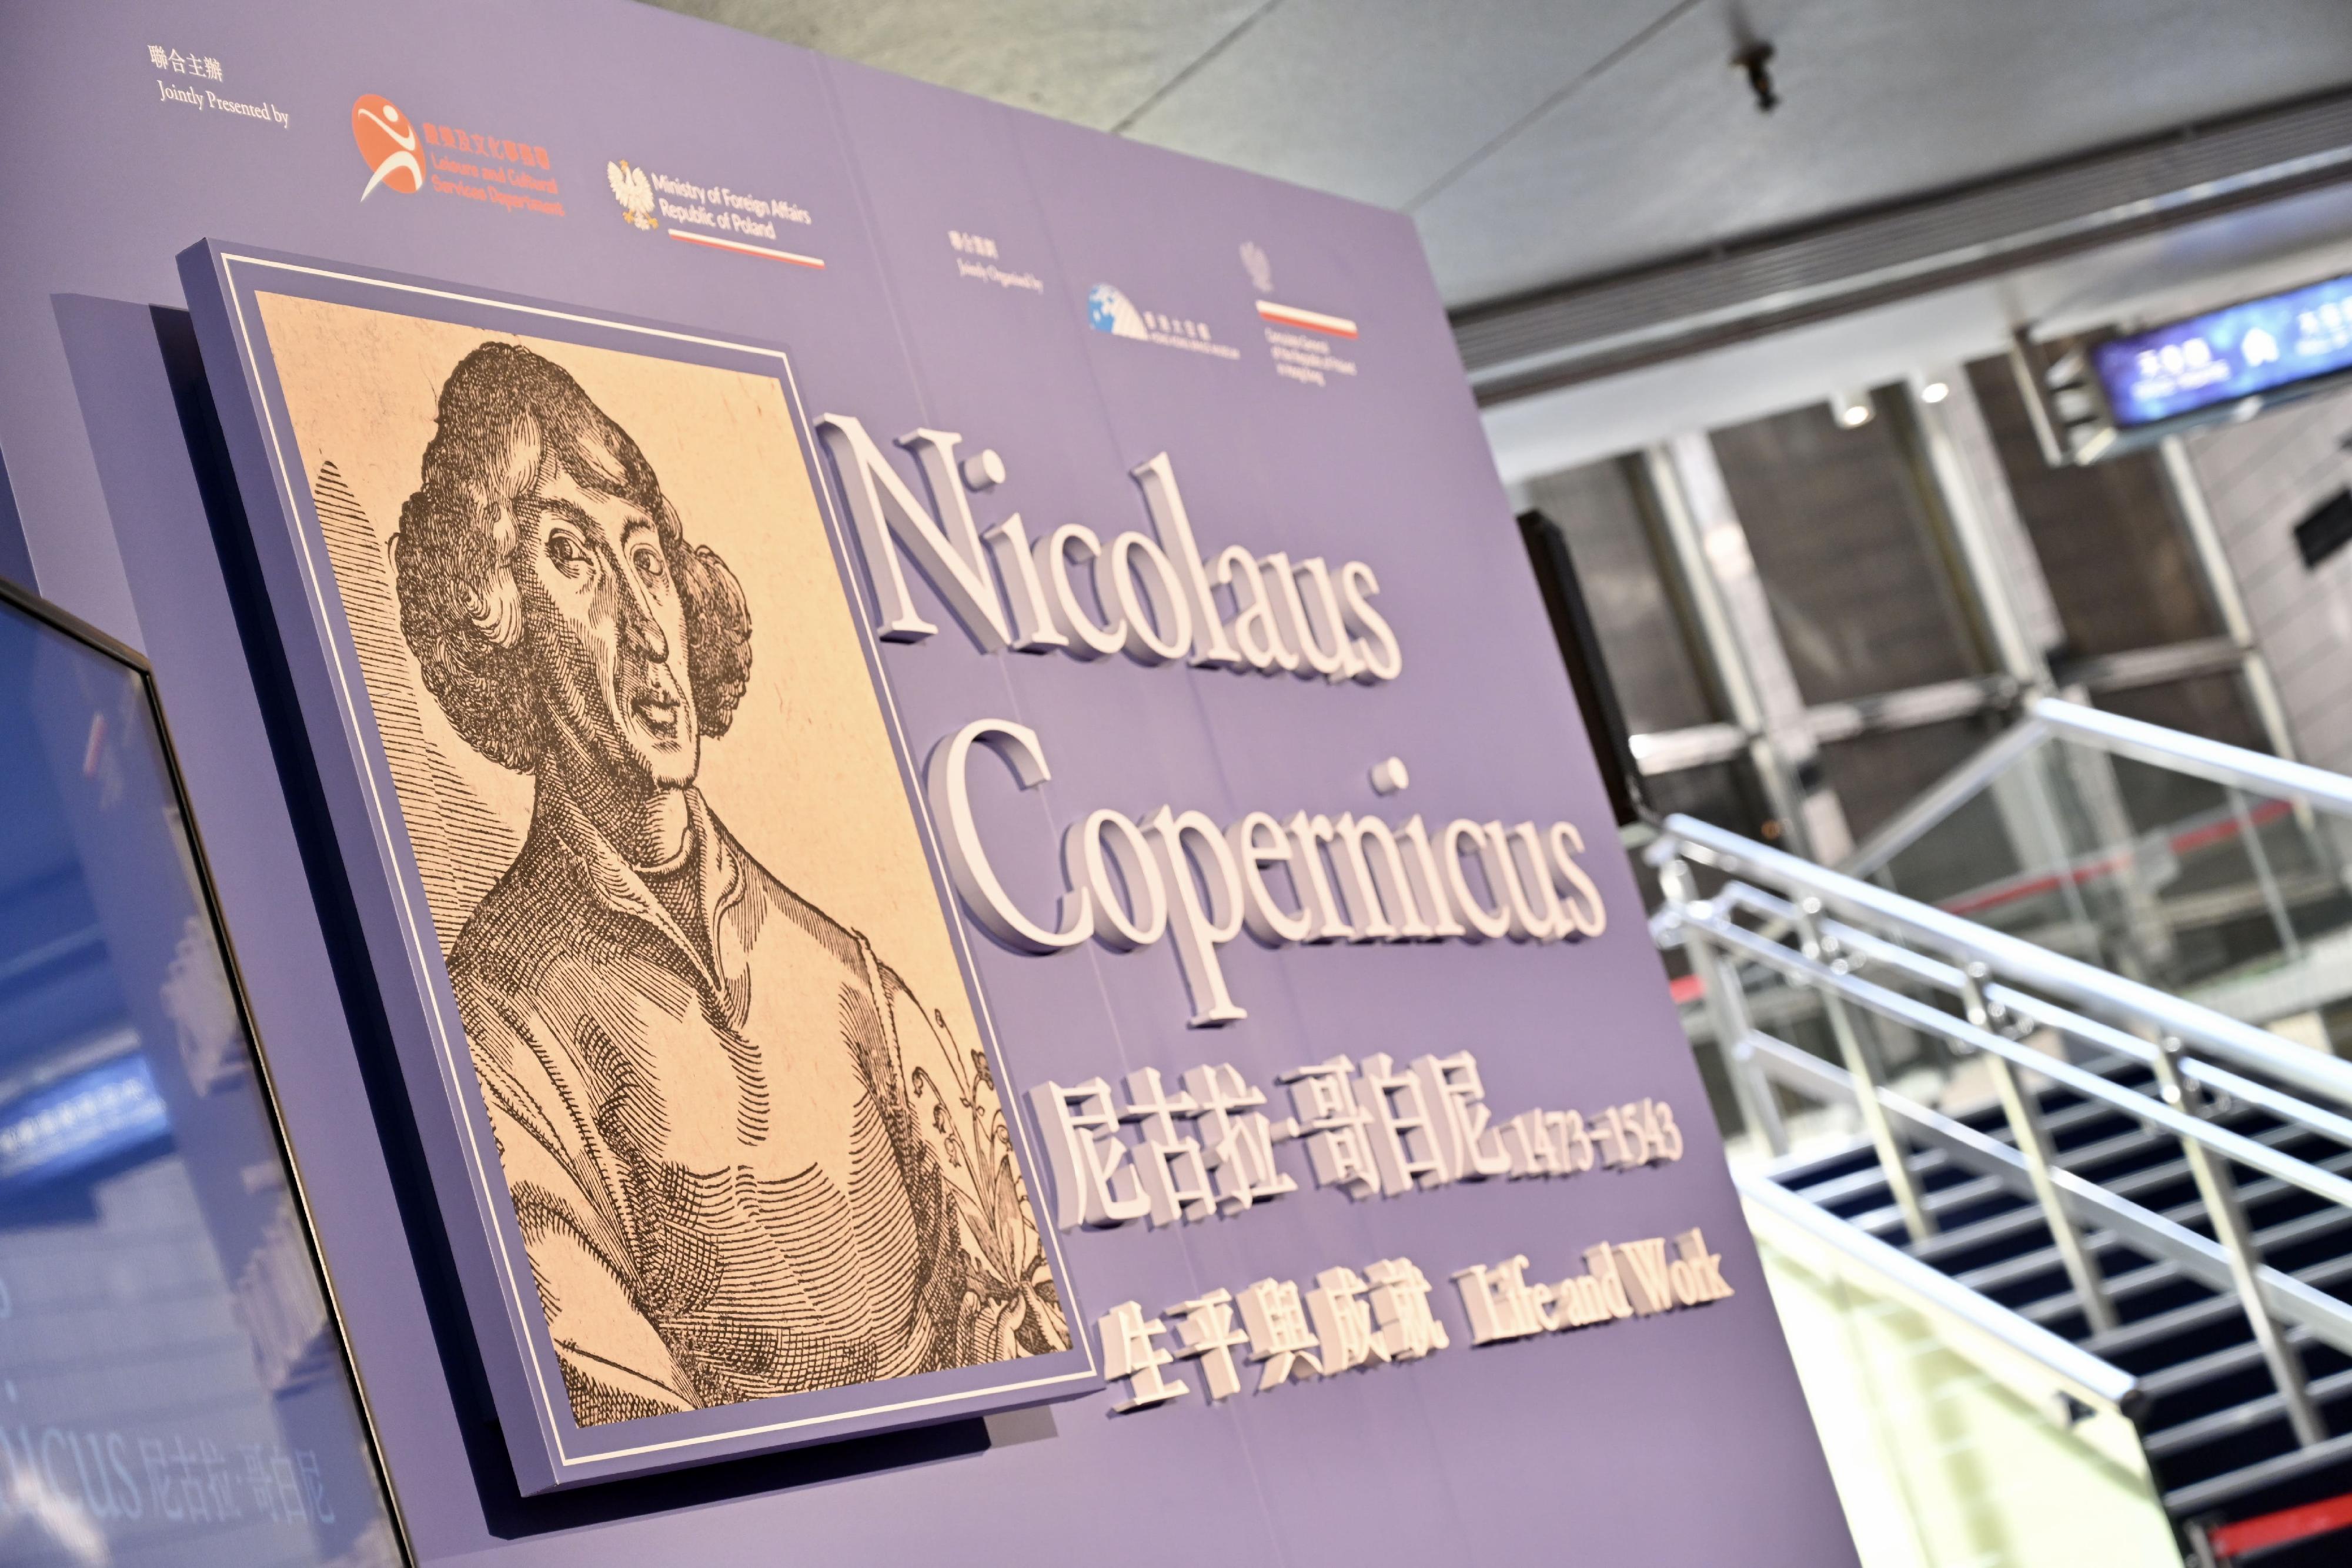 To mark the 550th anniversary of the birth of the renowned Polish astronomer Nicolaus Copernicus this year, the Hong Kong Space Museum will launch a special exhibition "Nicolaus Copernicus: Life and Work" starting tomorrow (June 21).